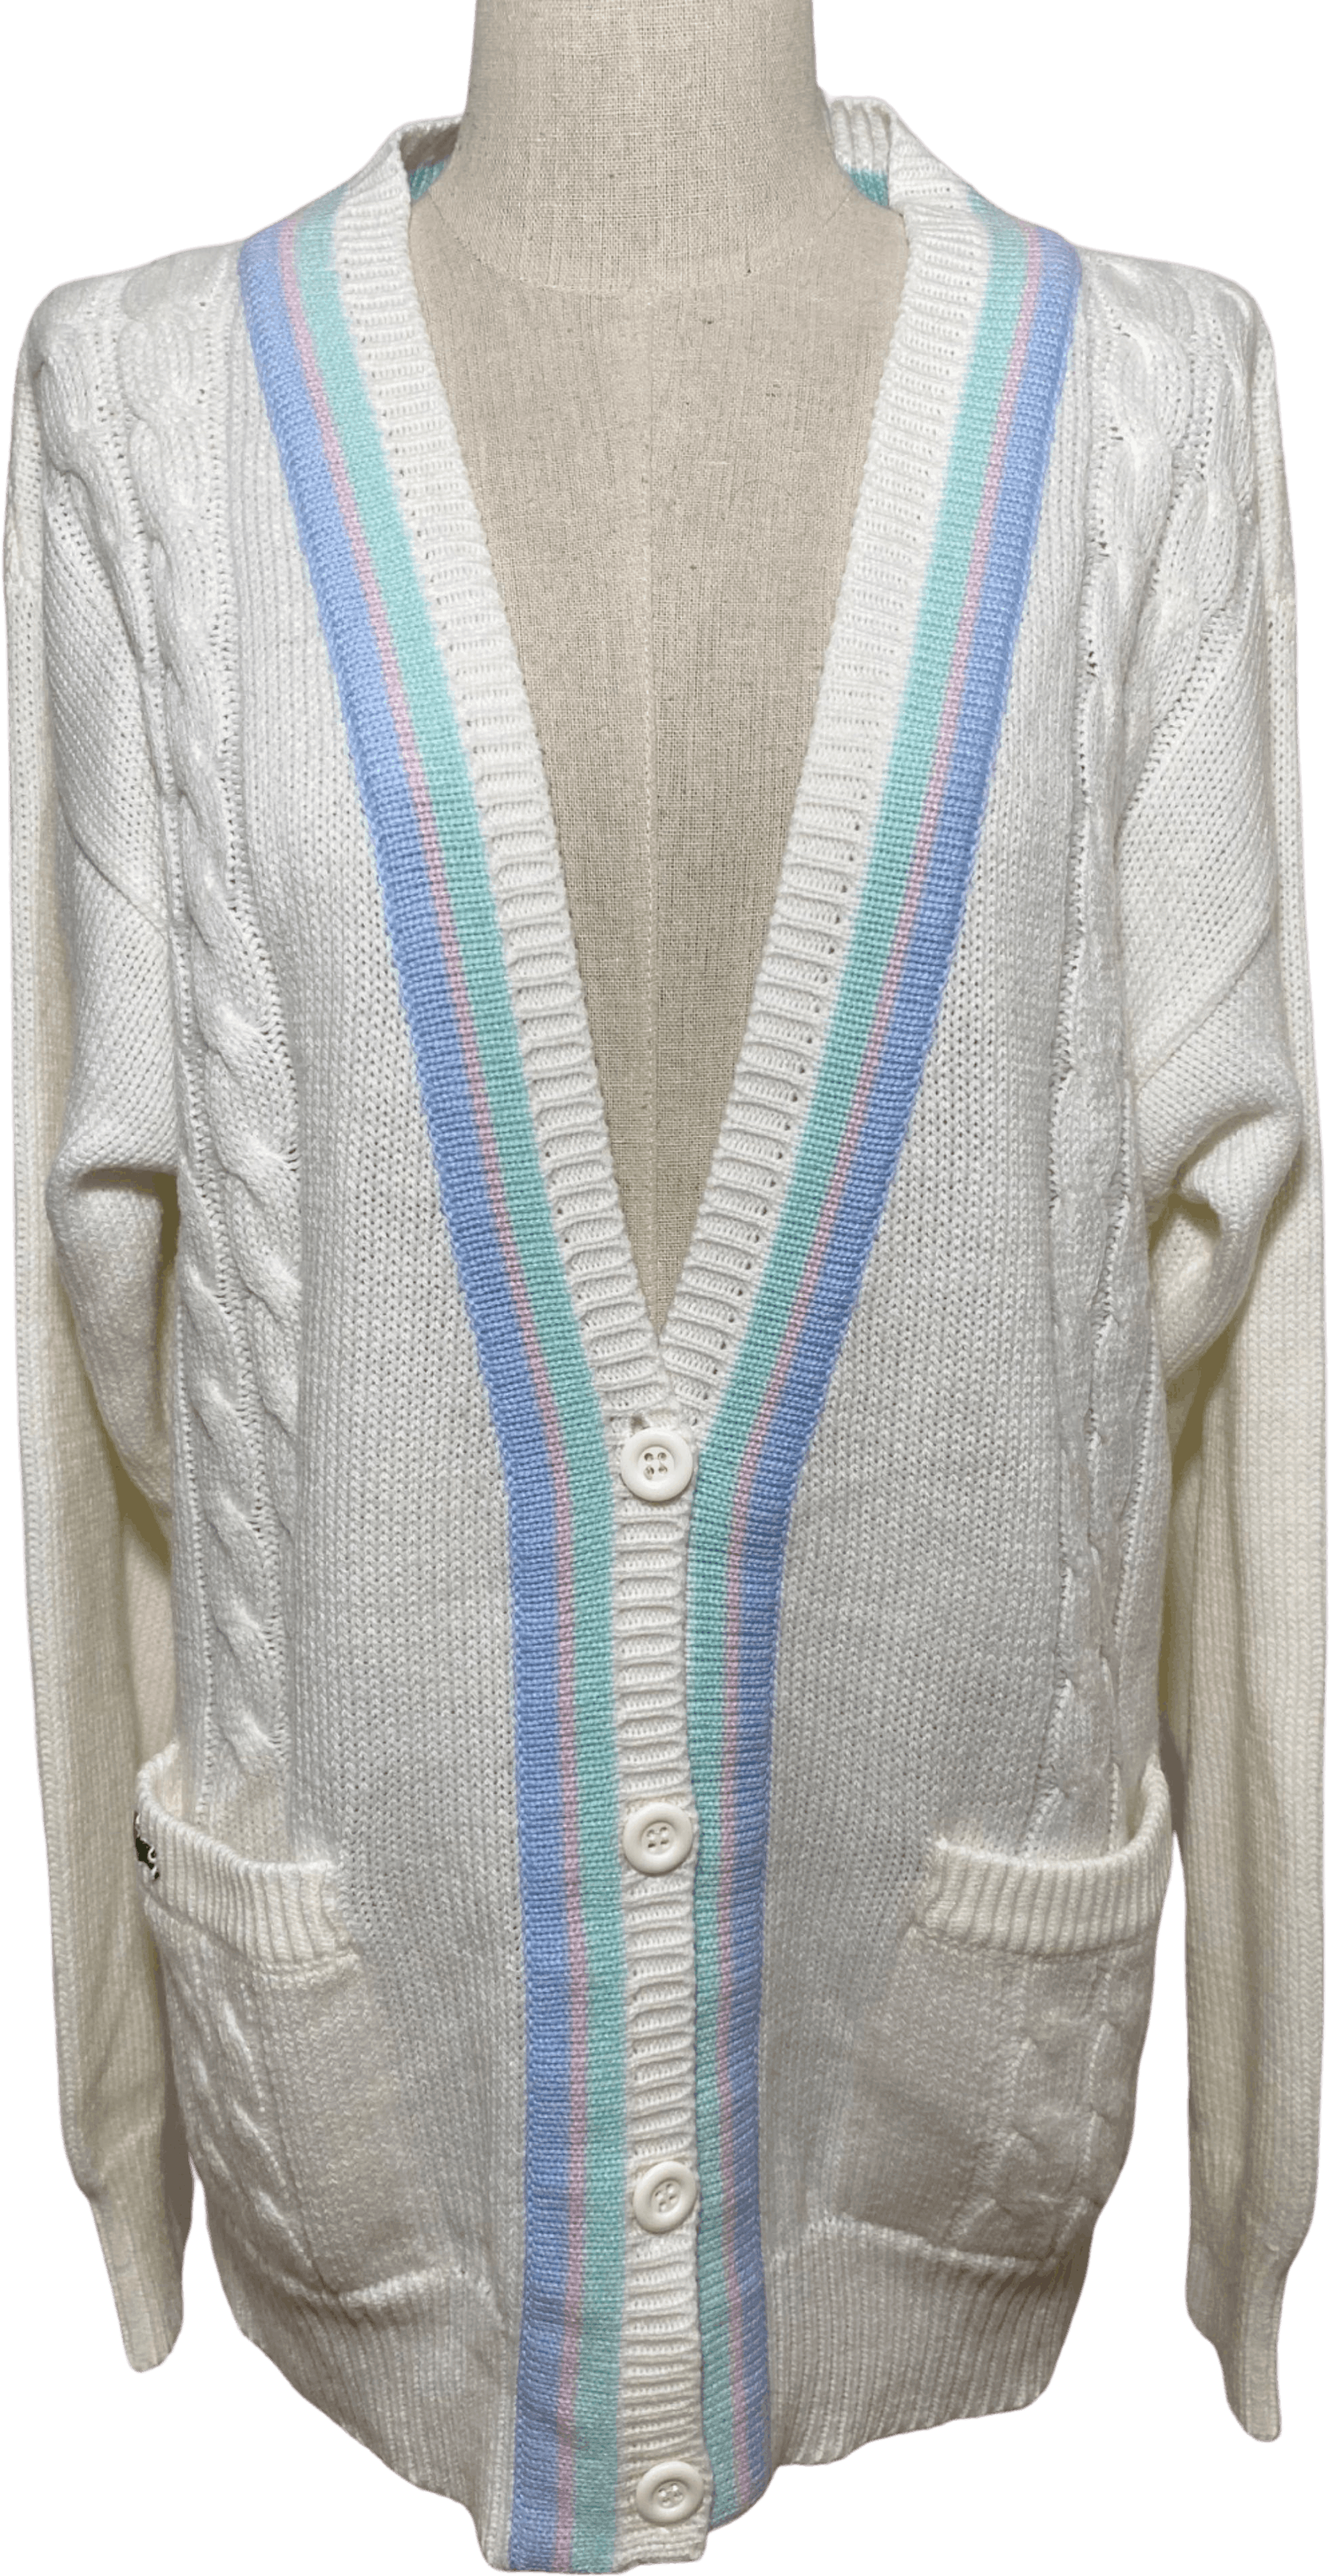 Vanærende Frank Worthley Væk White Knitted Vintage Lacoste Cardigan by Lacoste - Free Shipping -  Thrilling